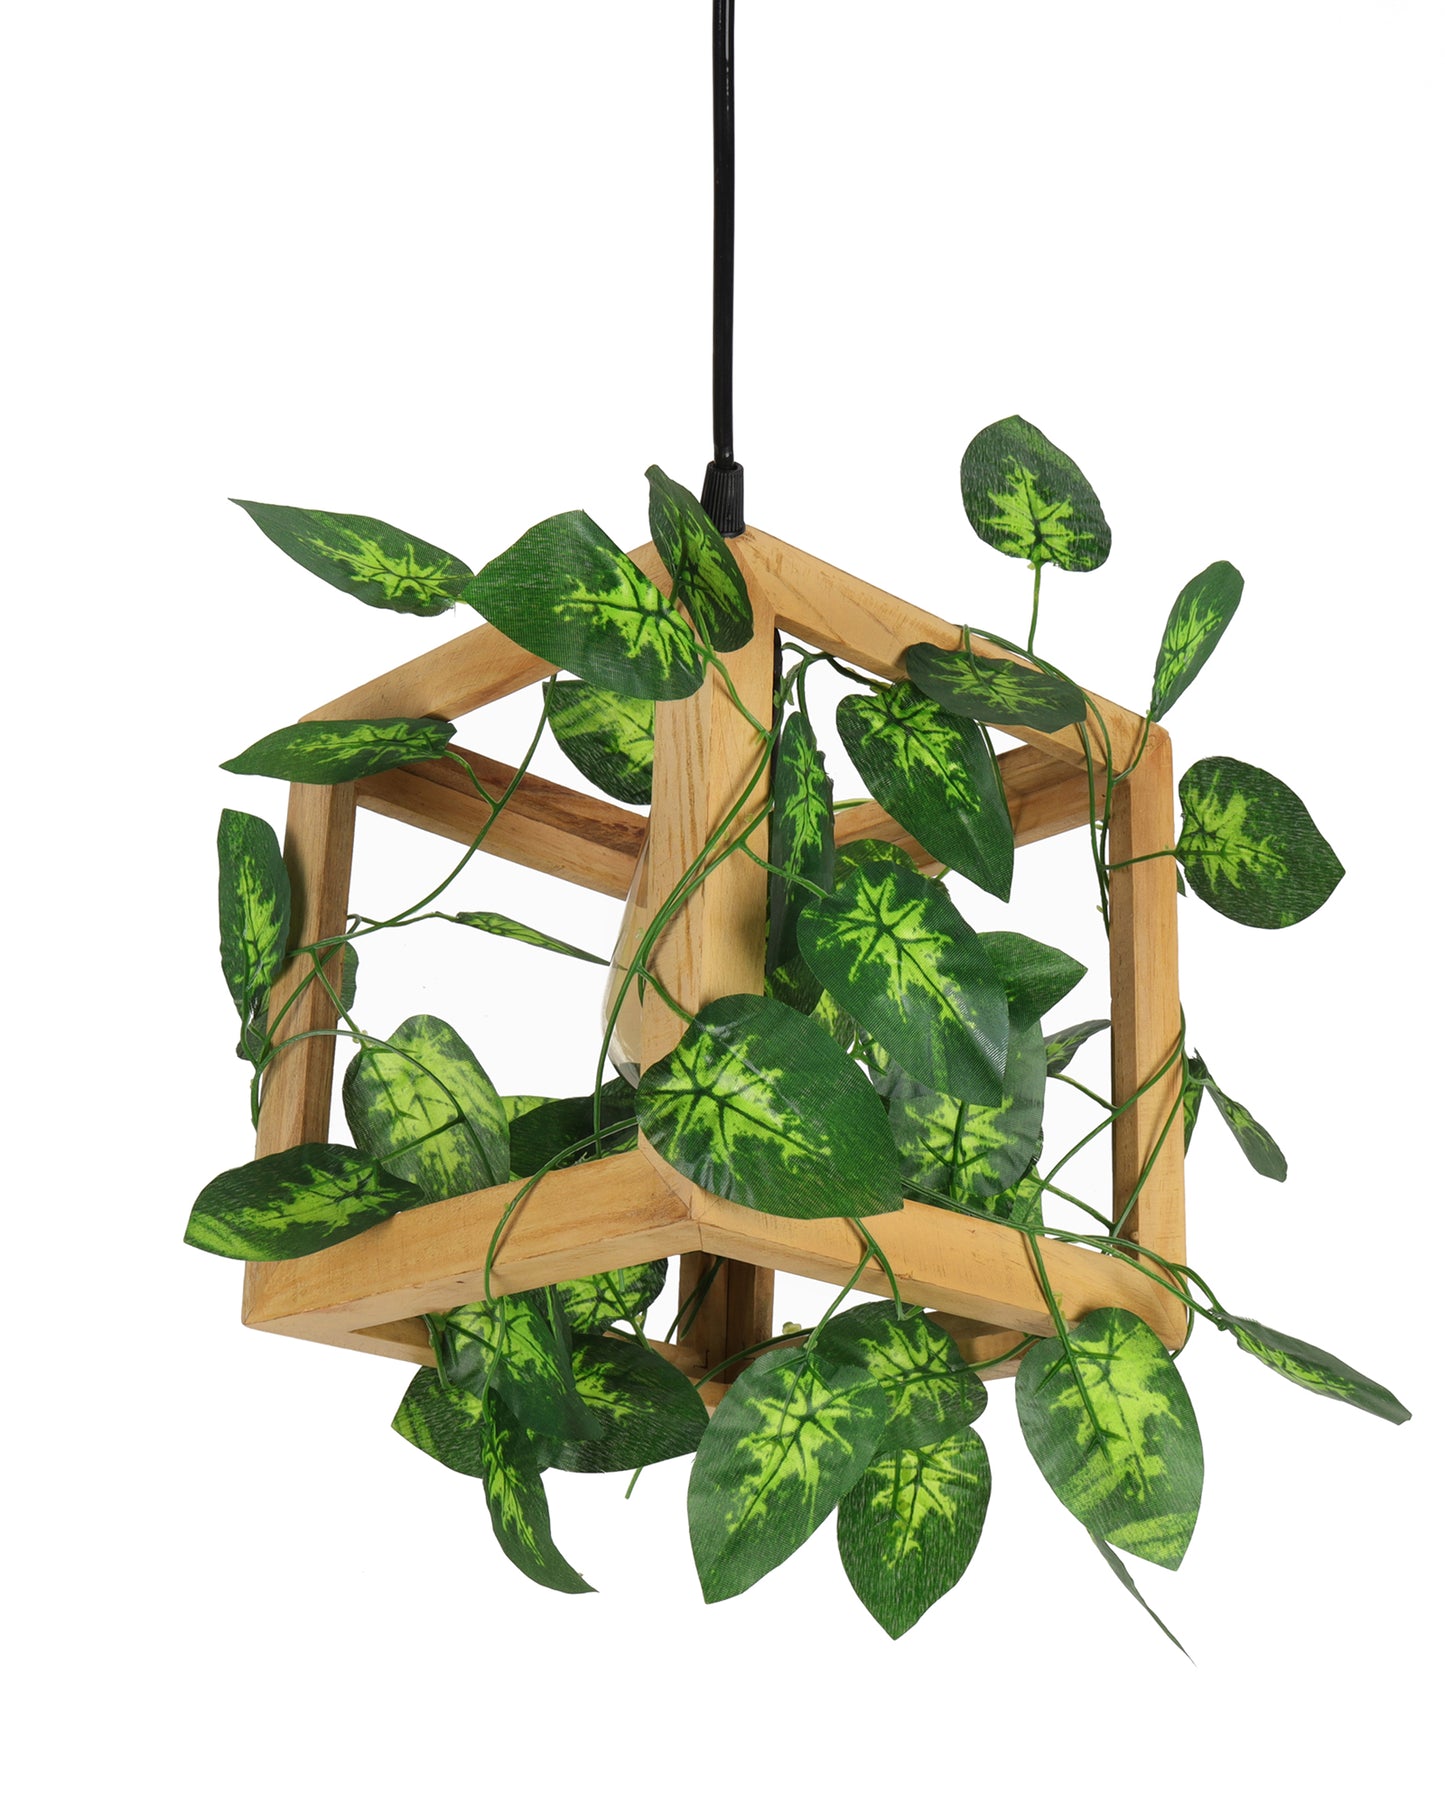 Hanging Pendant Plant Light Fixtures Creative Home Decor Living Room Dining, Ceiling light with leafy vine and filament bulb, Natural Wood Cube